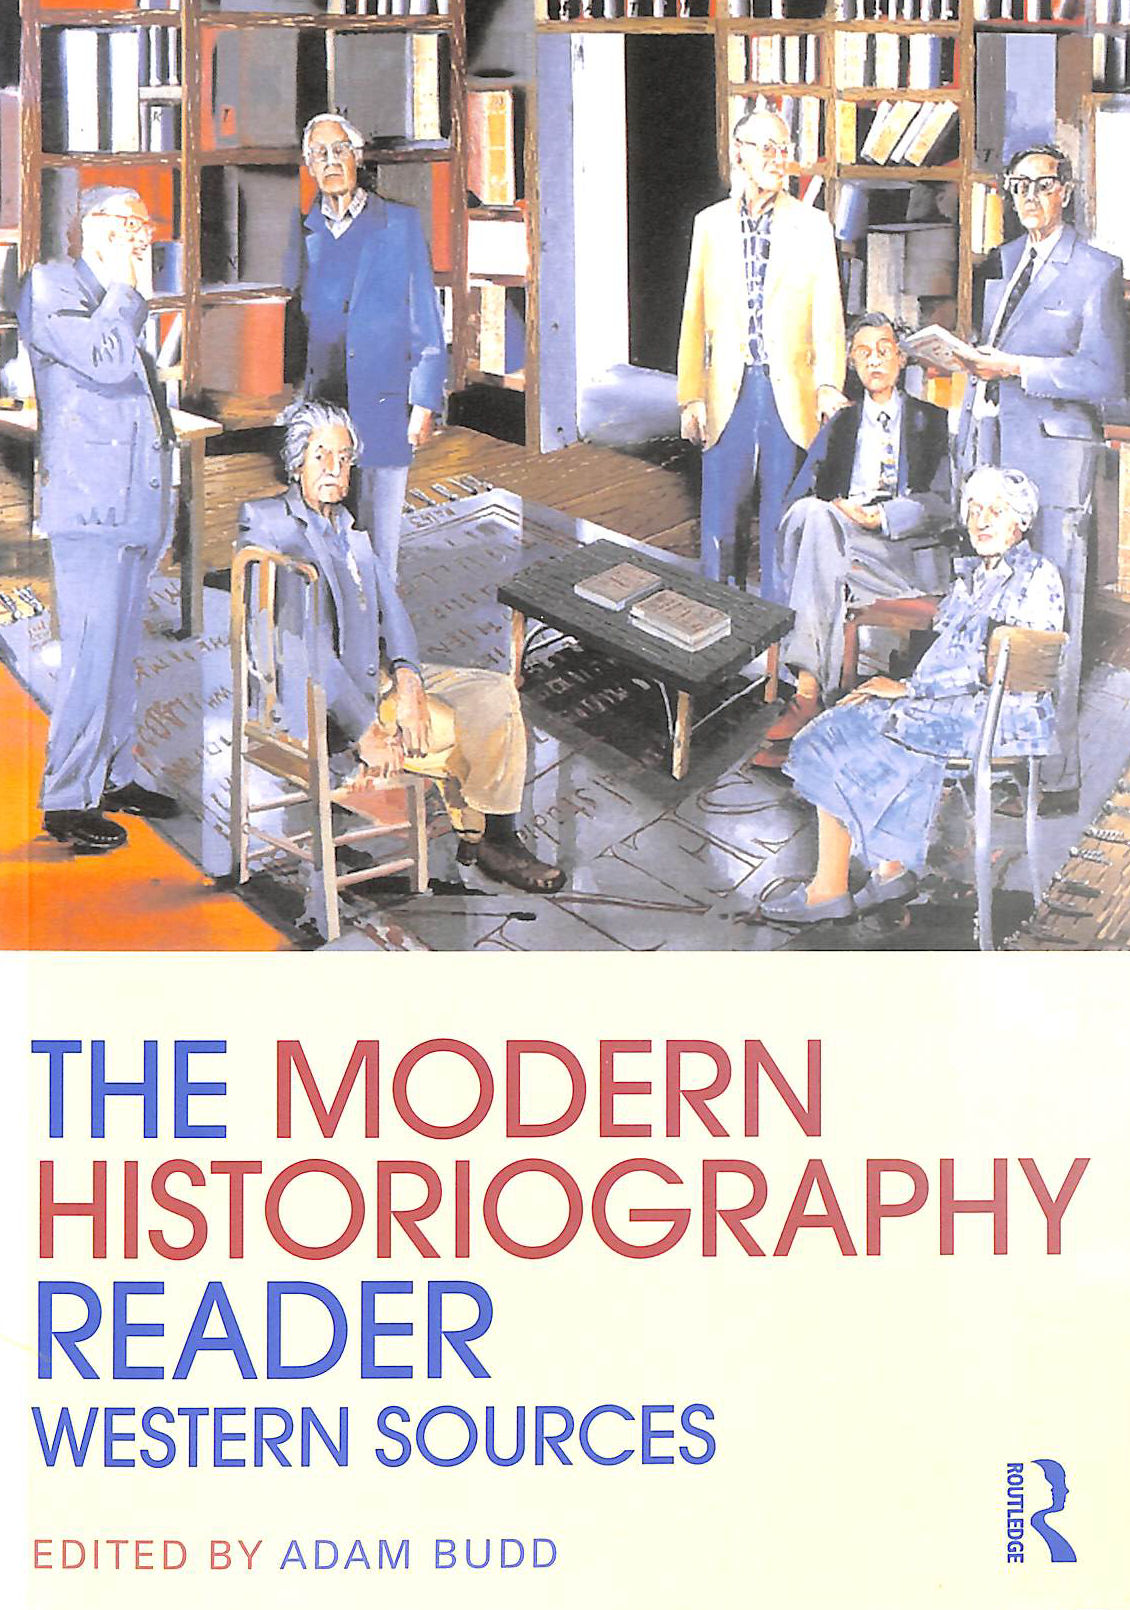 BUDD, ADAM [EDITOR] - Modern Historiography Reader: Western Sources (Routledge Readers in History)